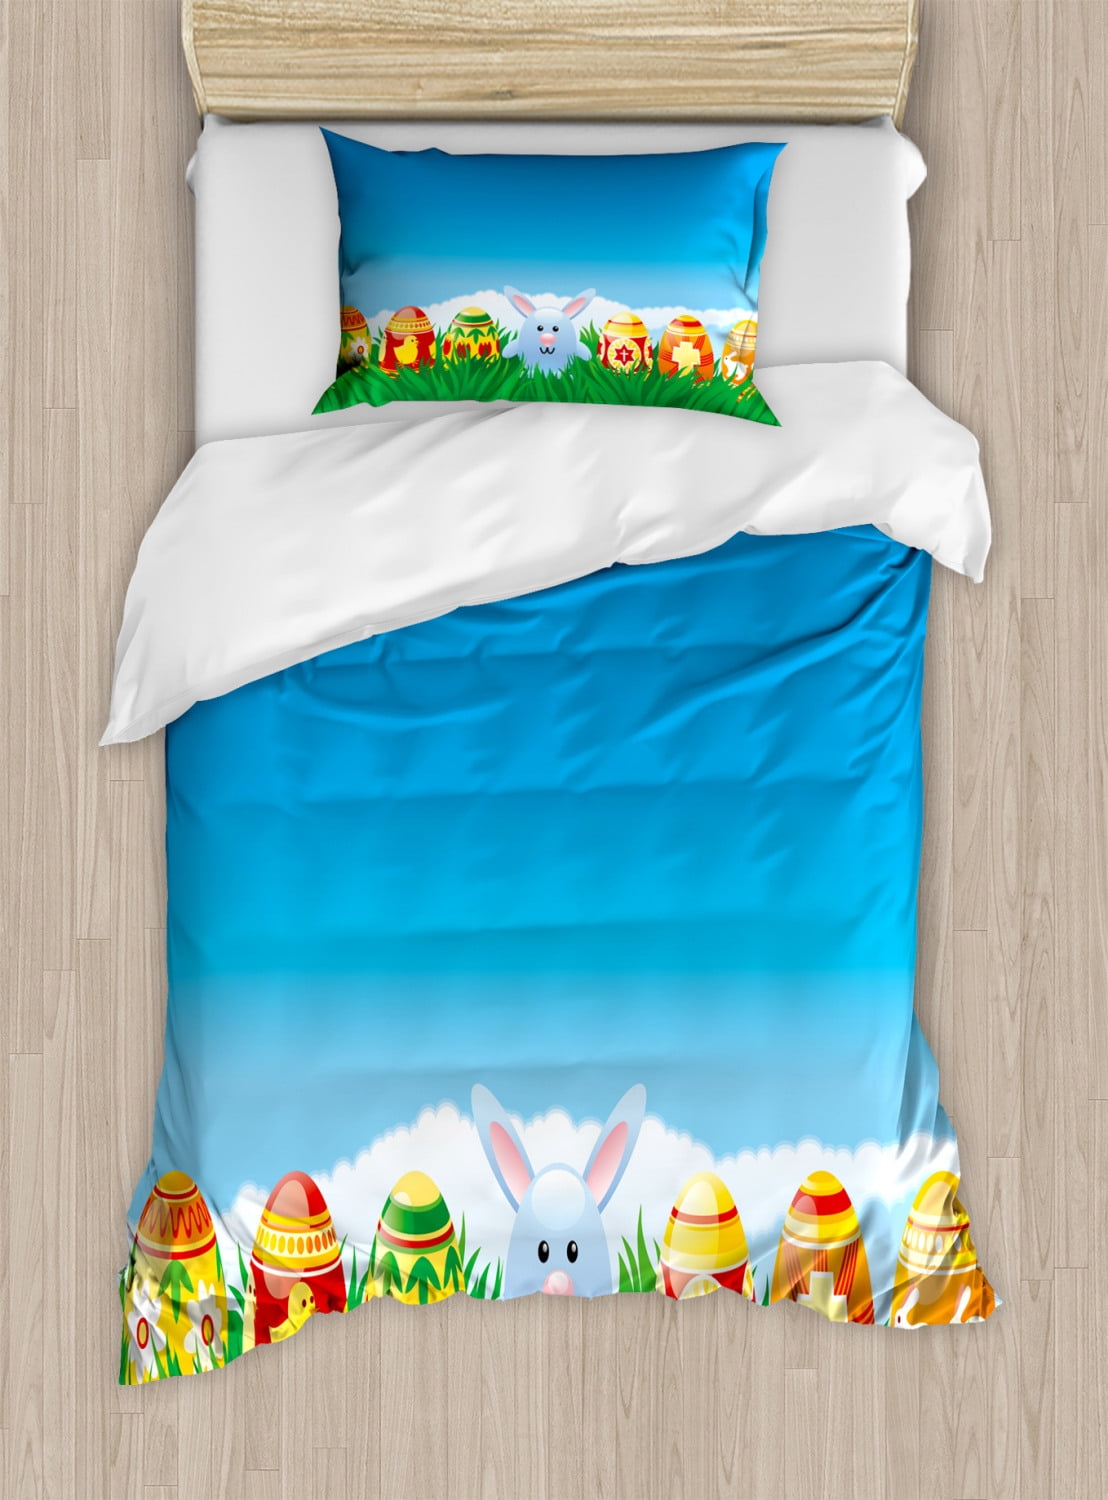 Easter Bunny Duvet Cover Set Twin Size, Cute Cartoon Illustration of ...